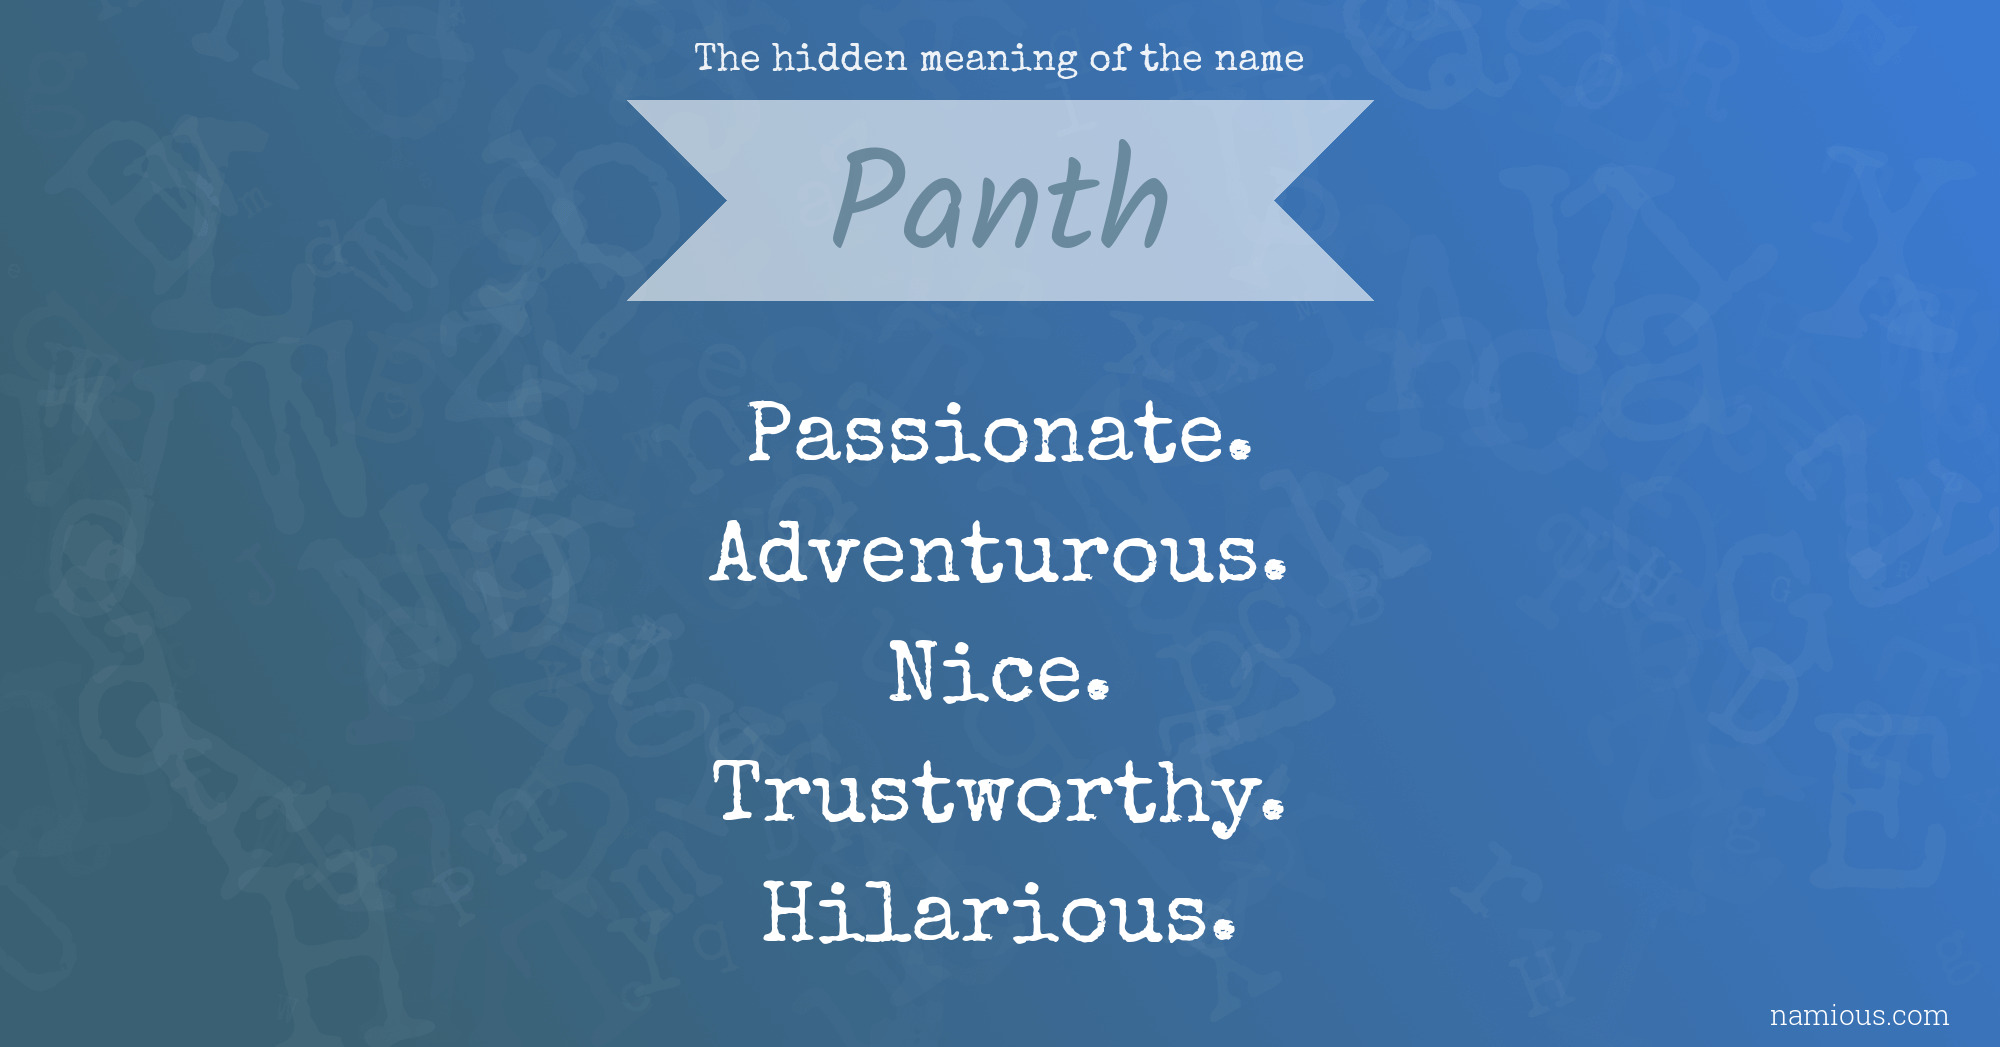 The hidden meaning of the name Panth